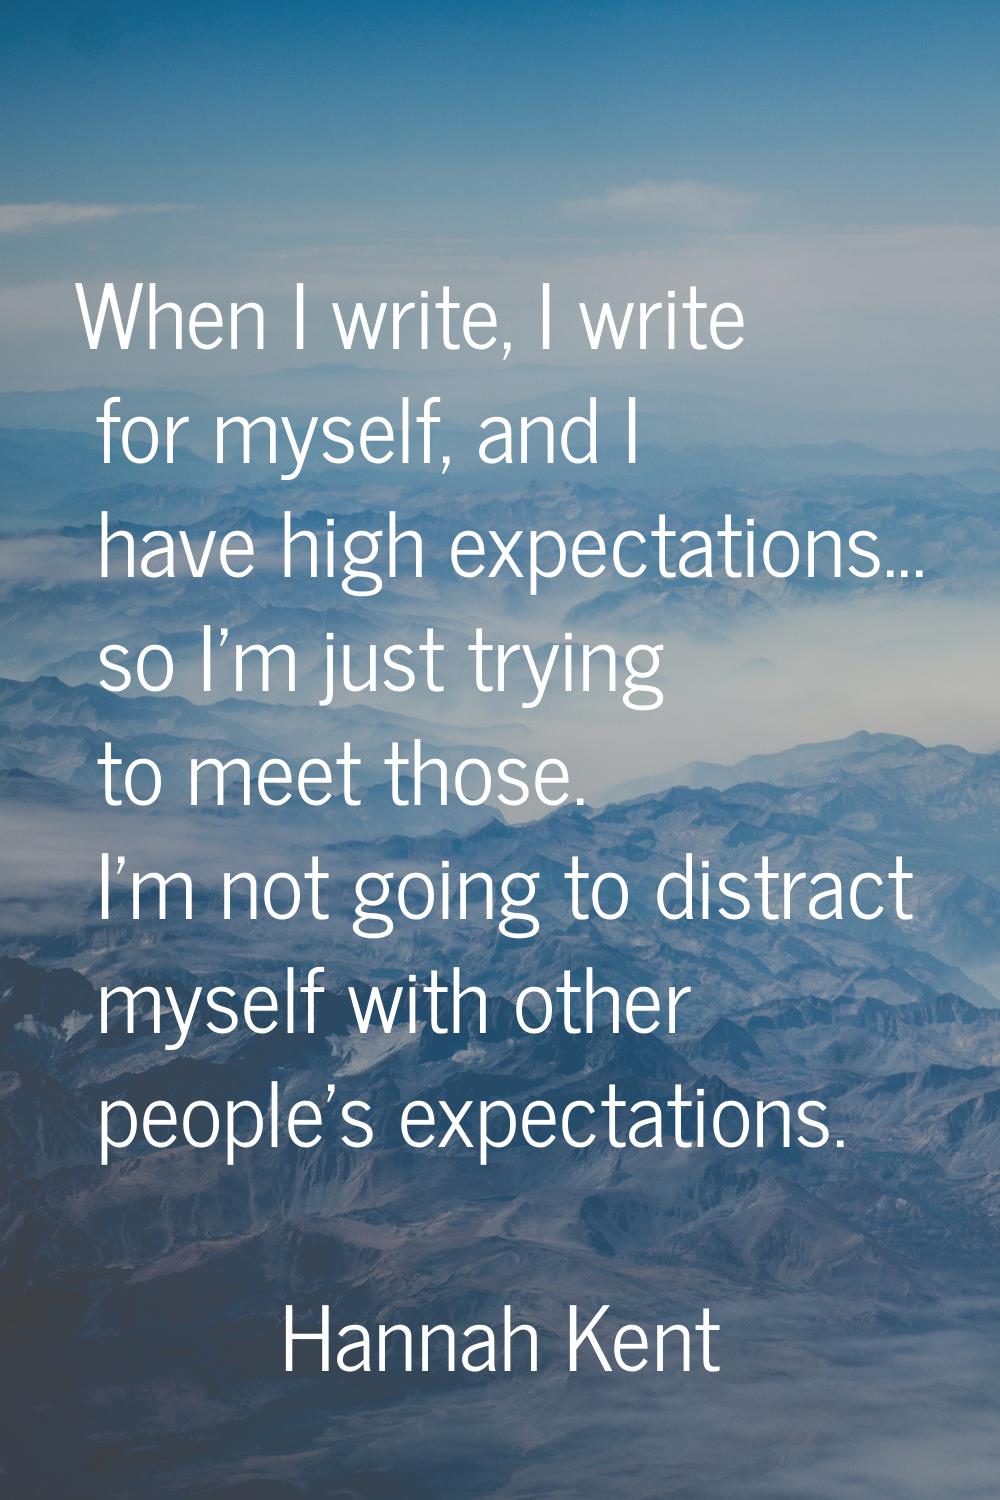 When I write, I write for myself, and I have high expectations... so I'm just trying to meet those.